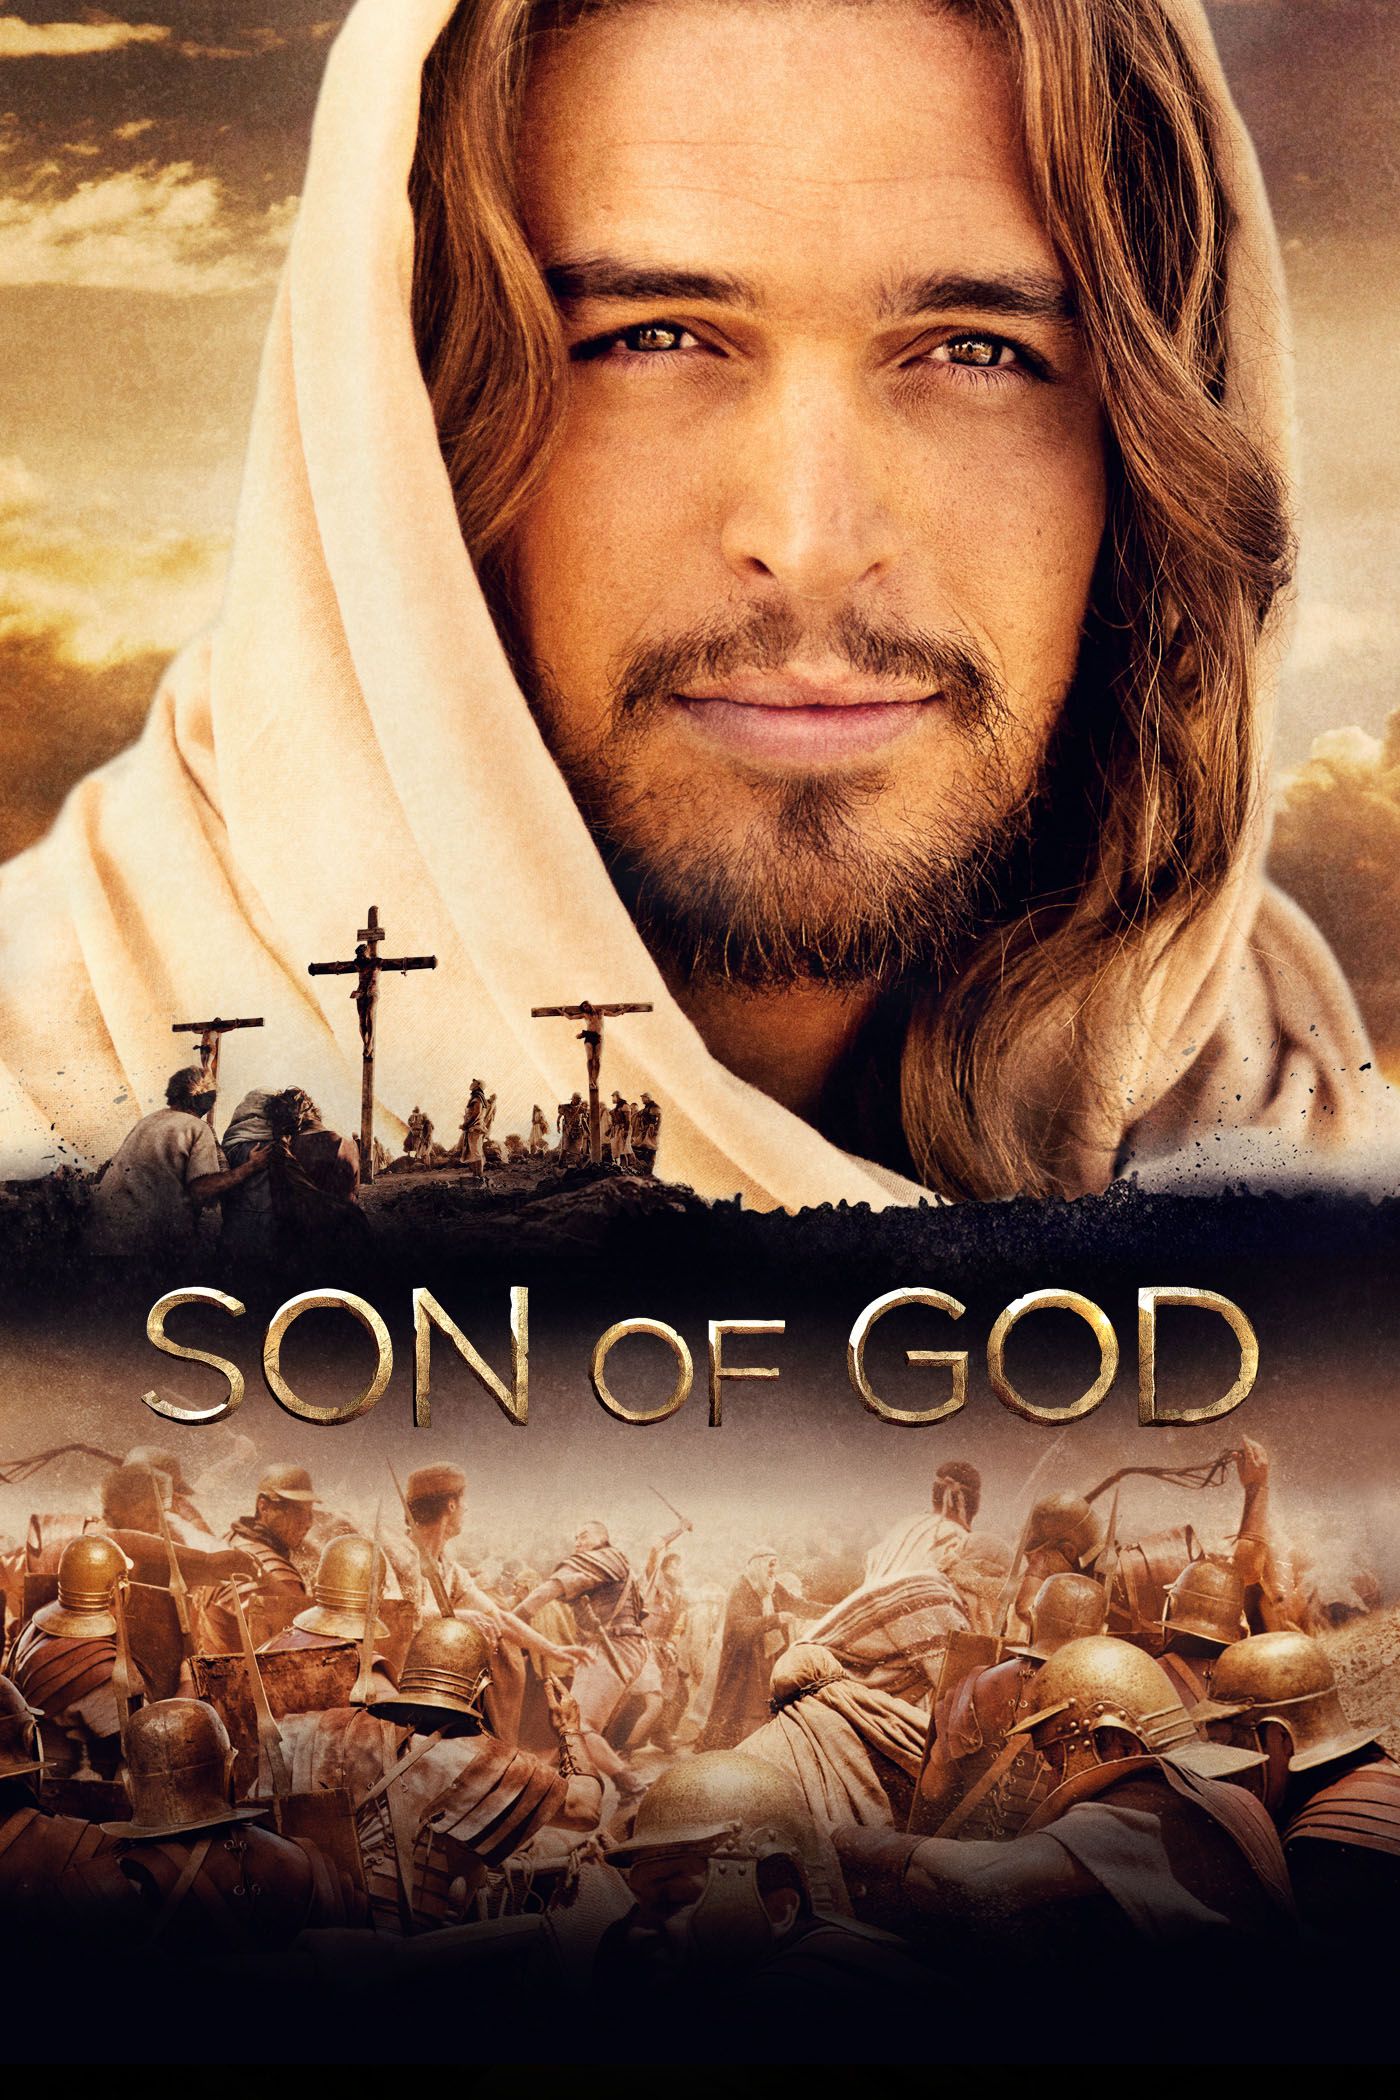 the passion of christ full movie fox news